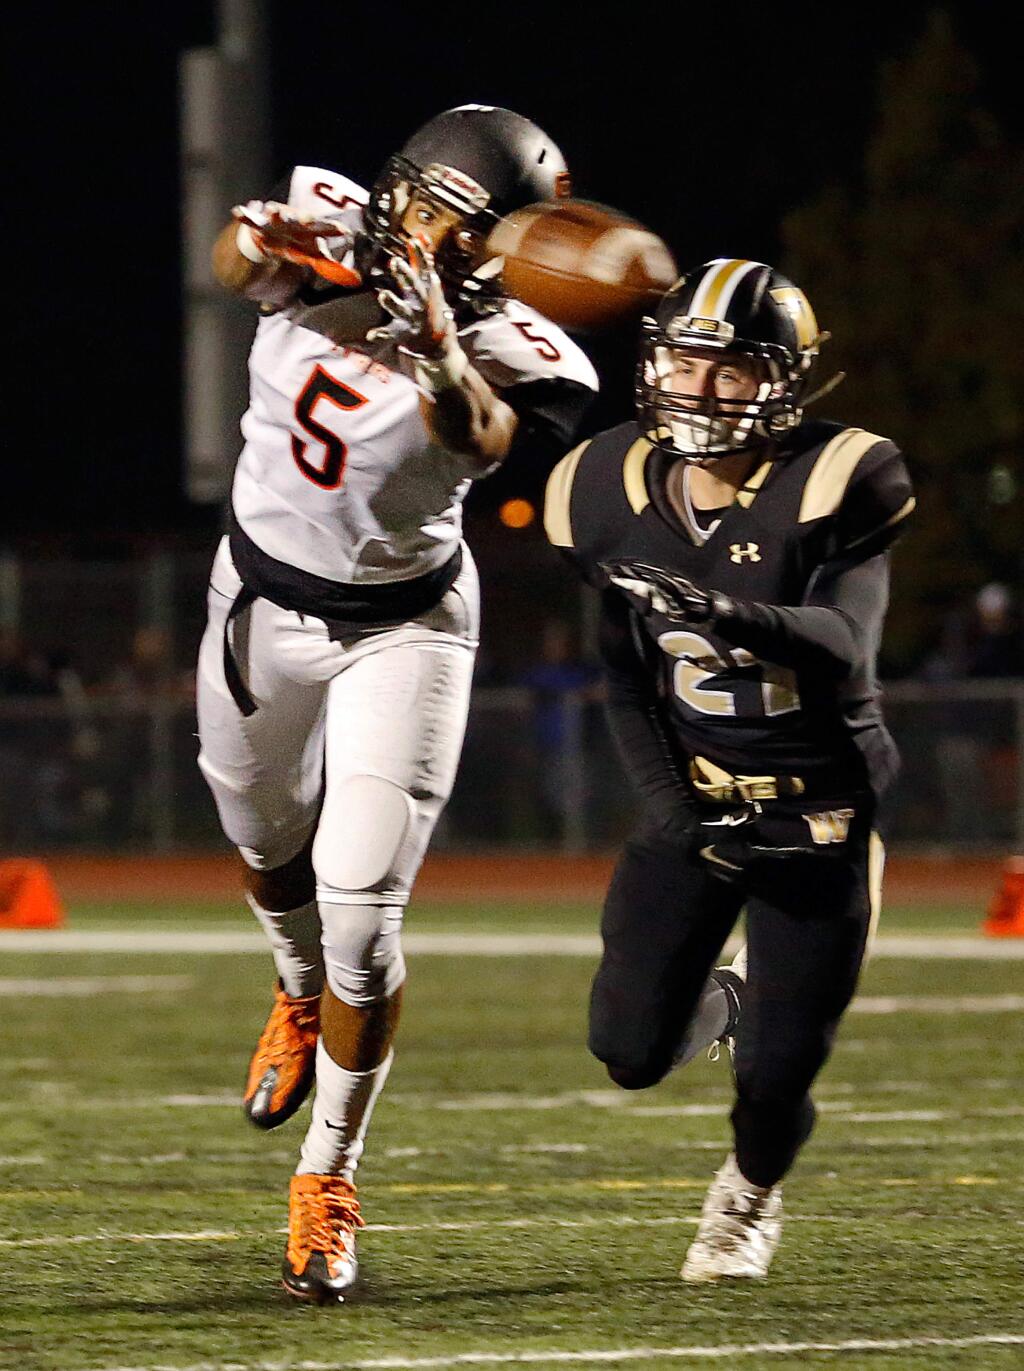 Santa Rosa's Kalei Aukai (5), left, misses catching a pass while covered by Windsor's Brett Stibi (21) during the first half of the NCS Division 2 quarterfinal football game between Santa Rosa and Windsor high schools in Windsor, California on Friday, November 18, 2016. (Alvin Jornada / The Press Democrat)